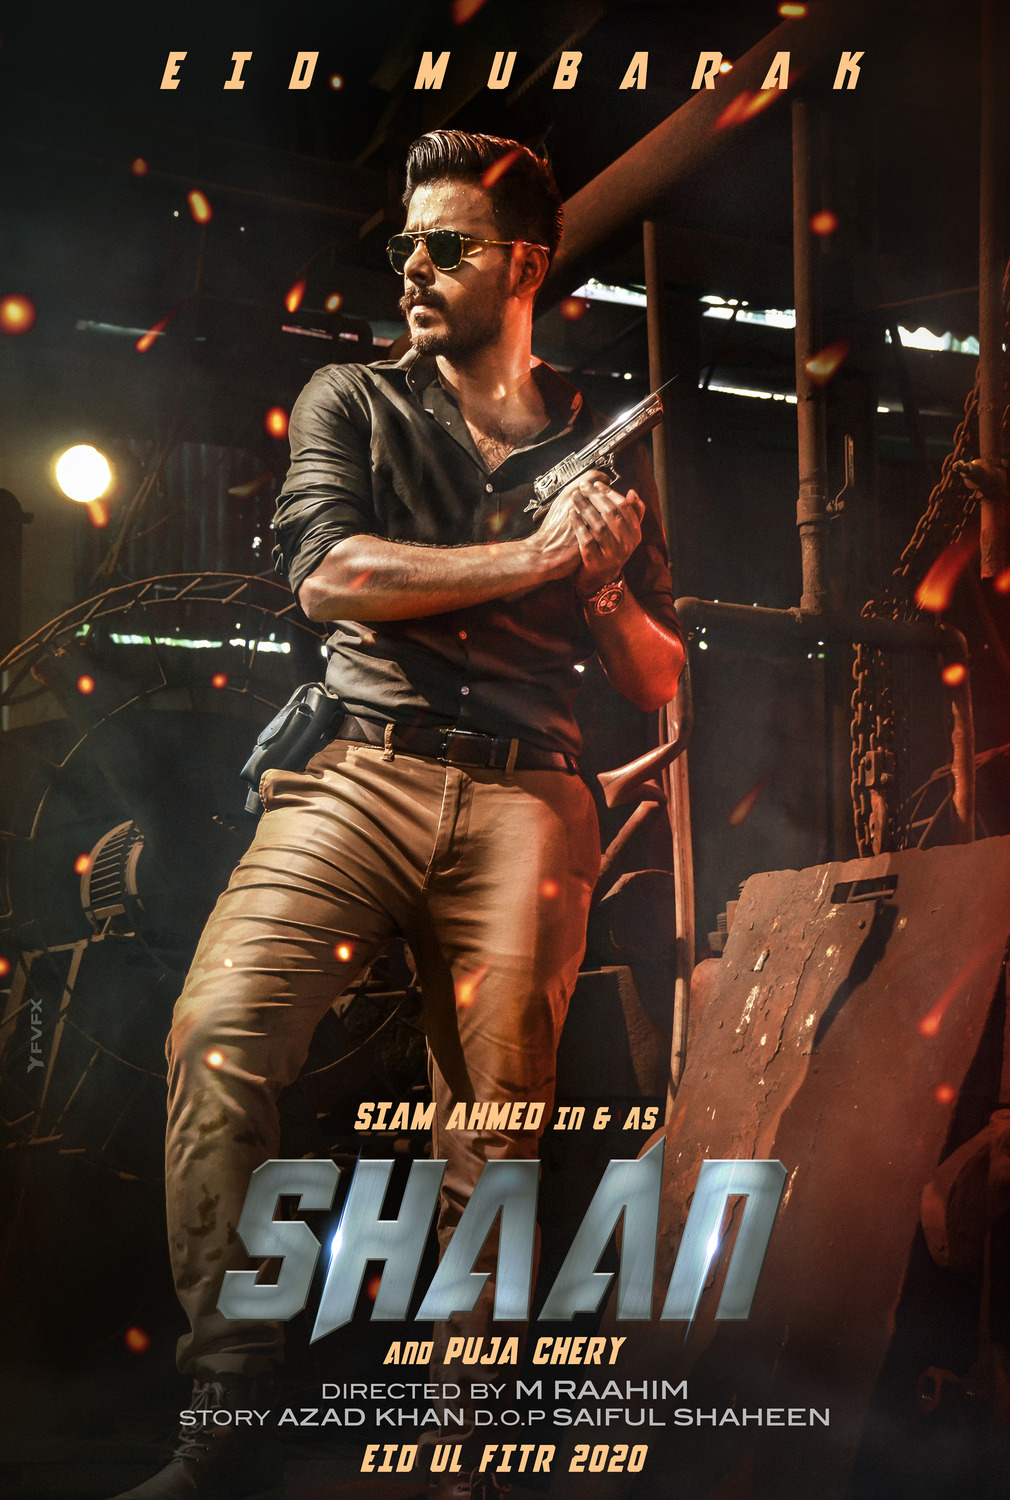 Extra Large Movie Poster Image for Shaan 